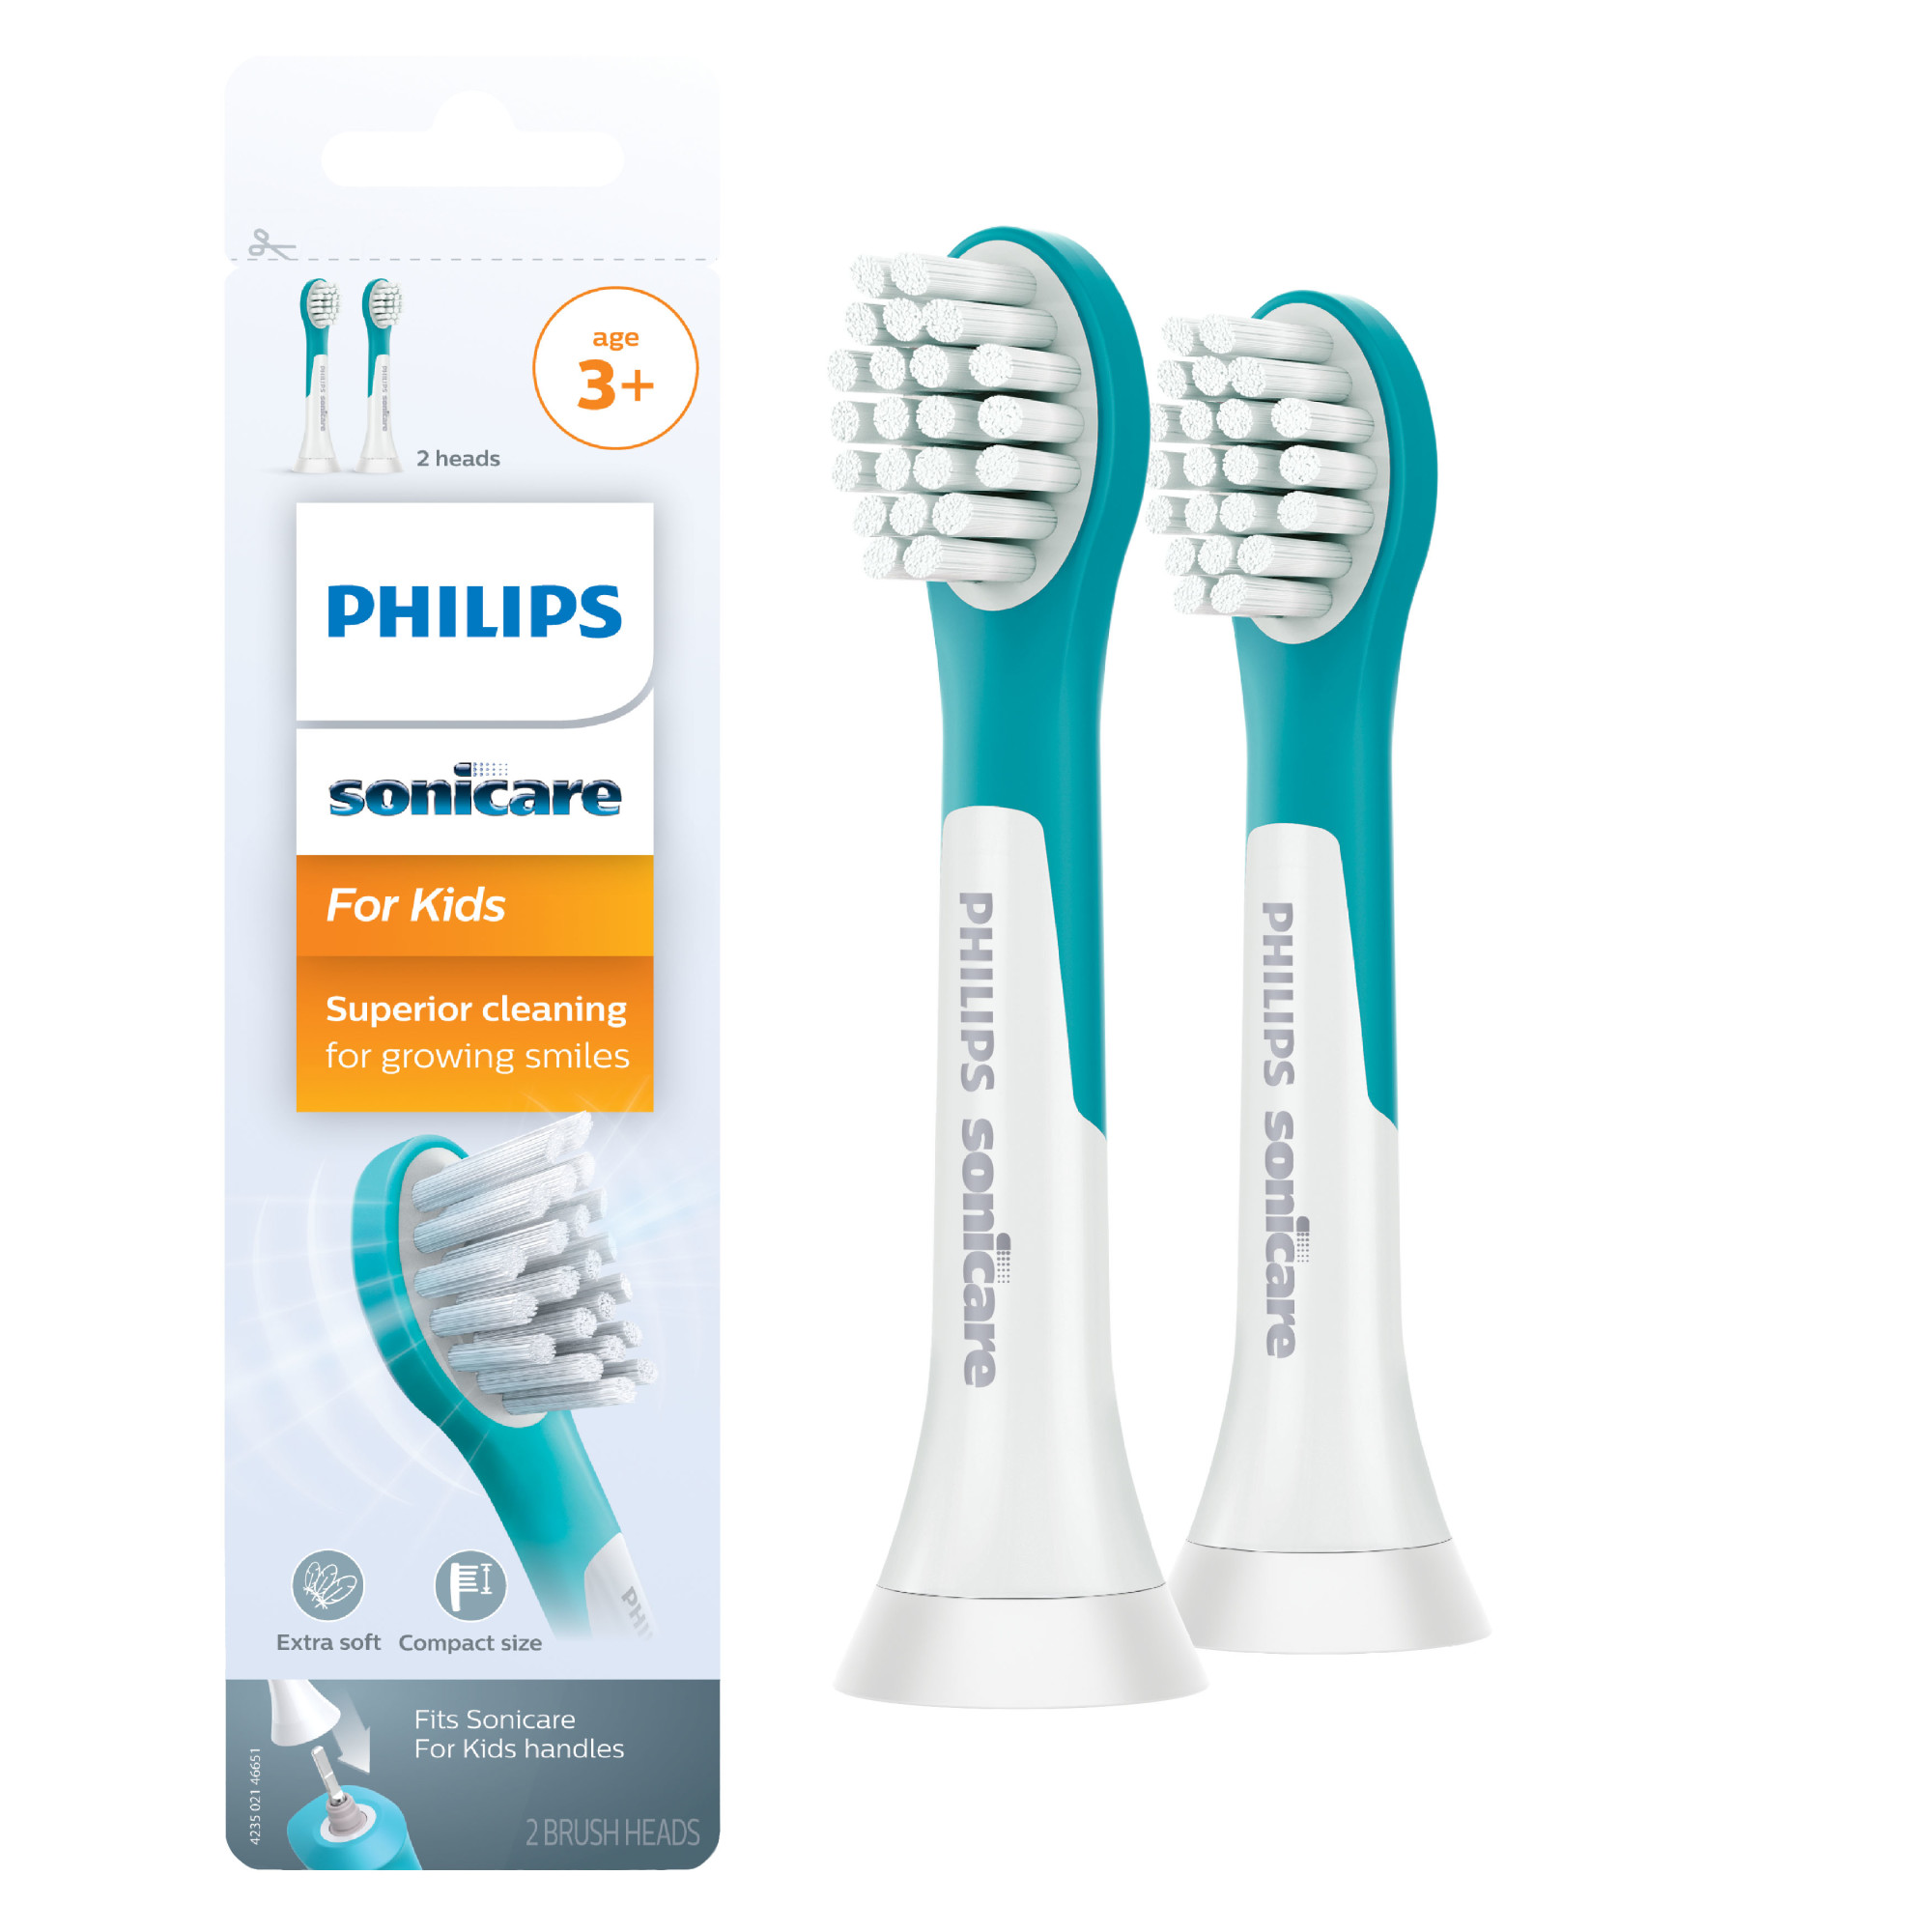 Philips Sonicare For Kids Replacement Toothbrush Heads, HX6032/94, 2-pk Compact - image 1 of 11